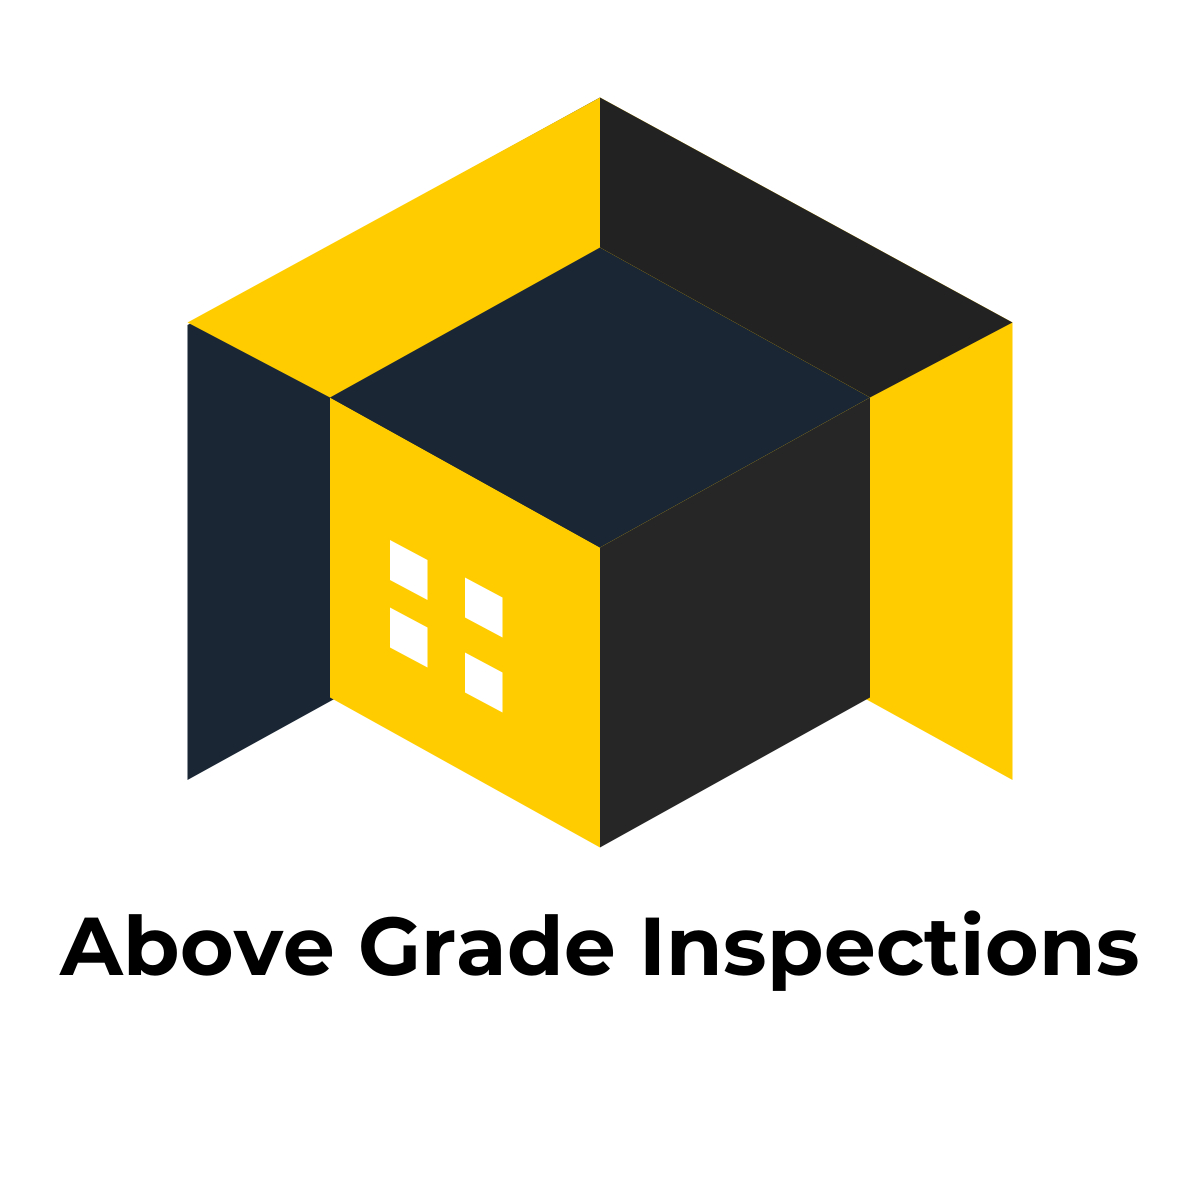 Above Grade Inspections